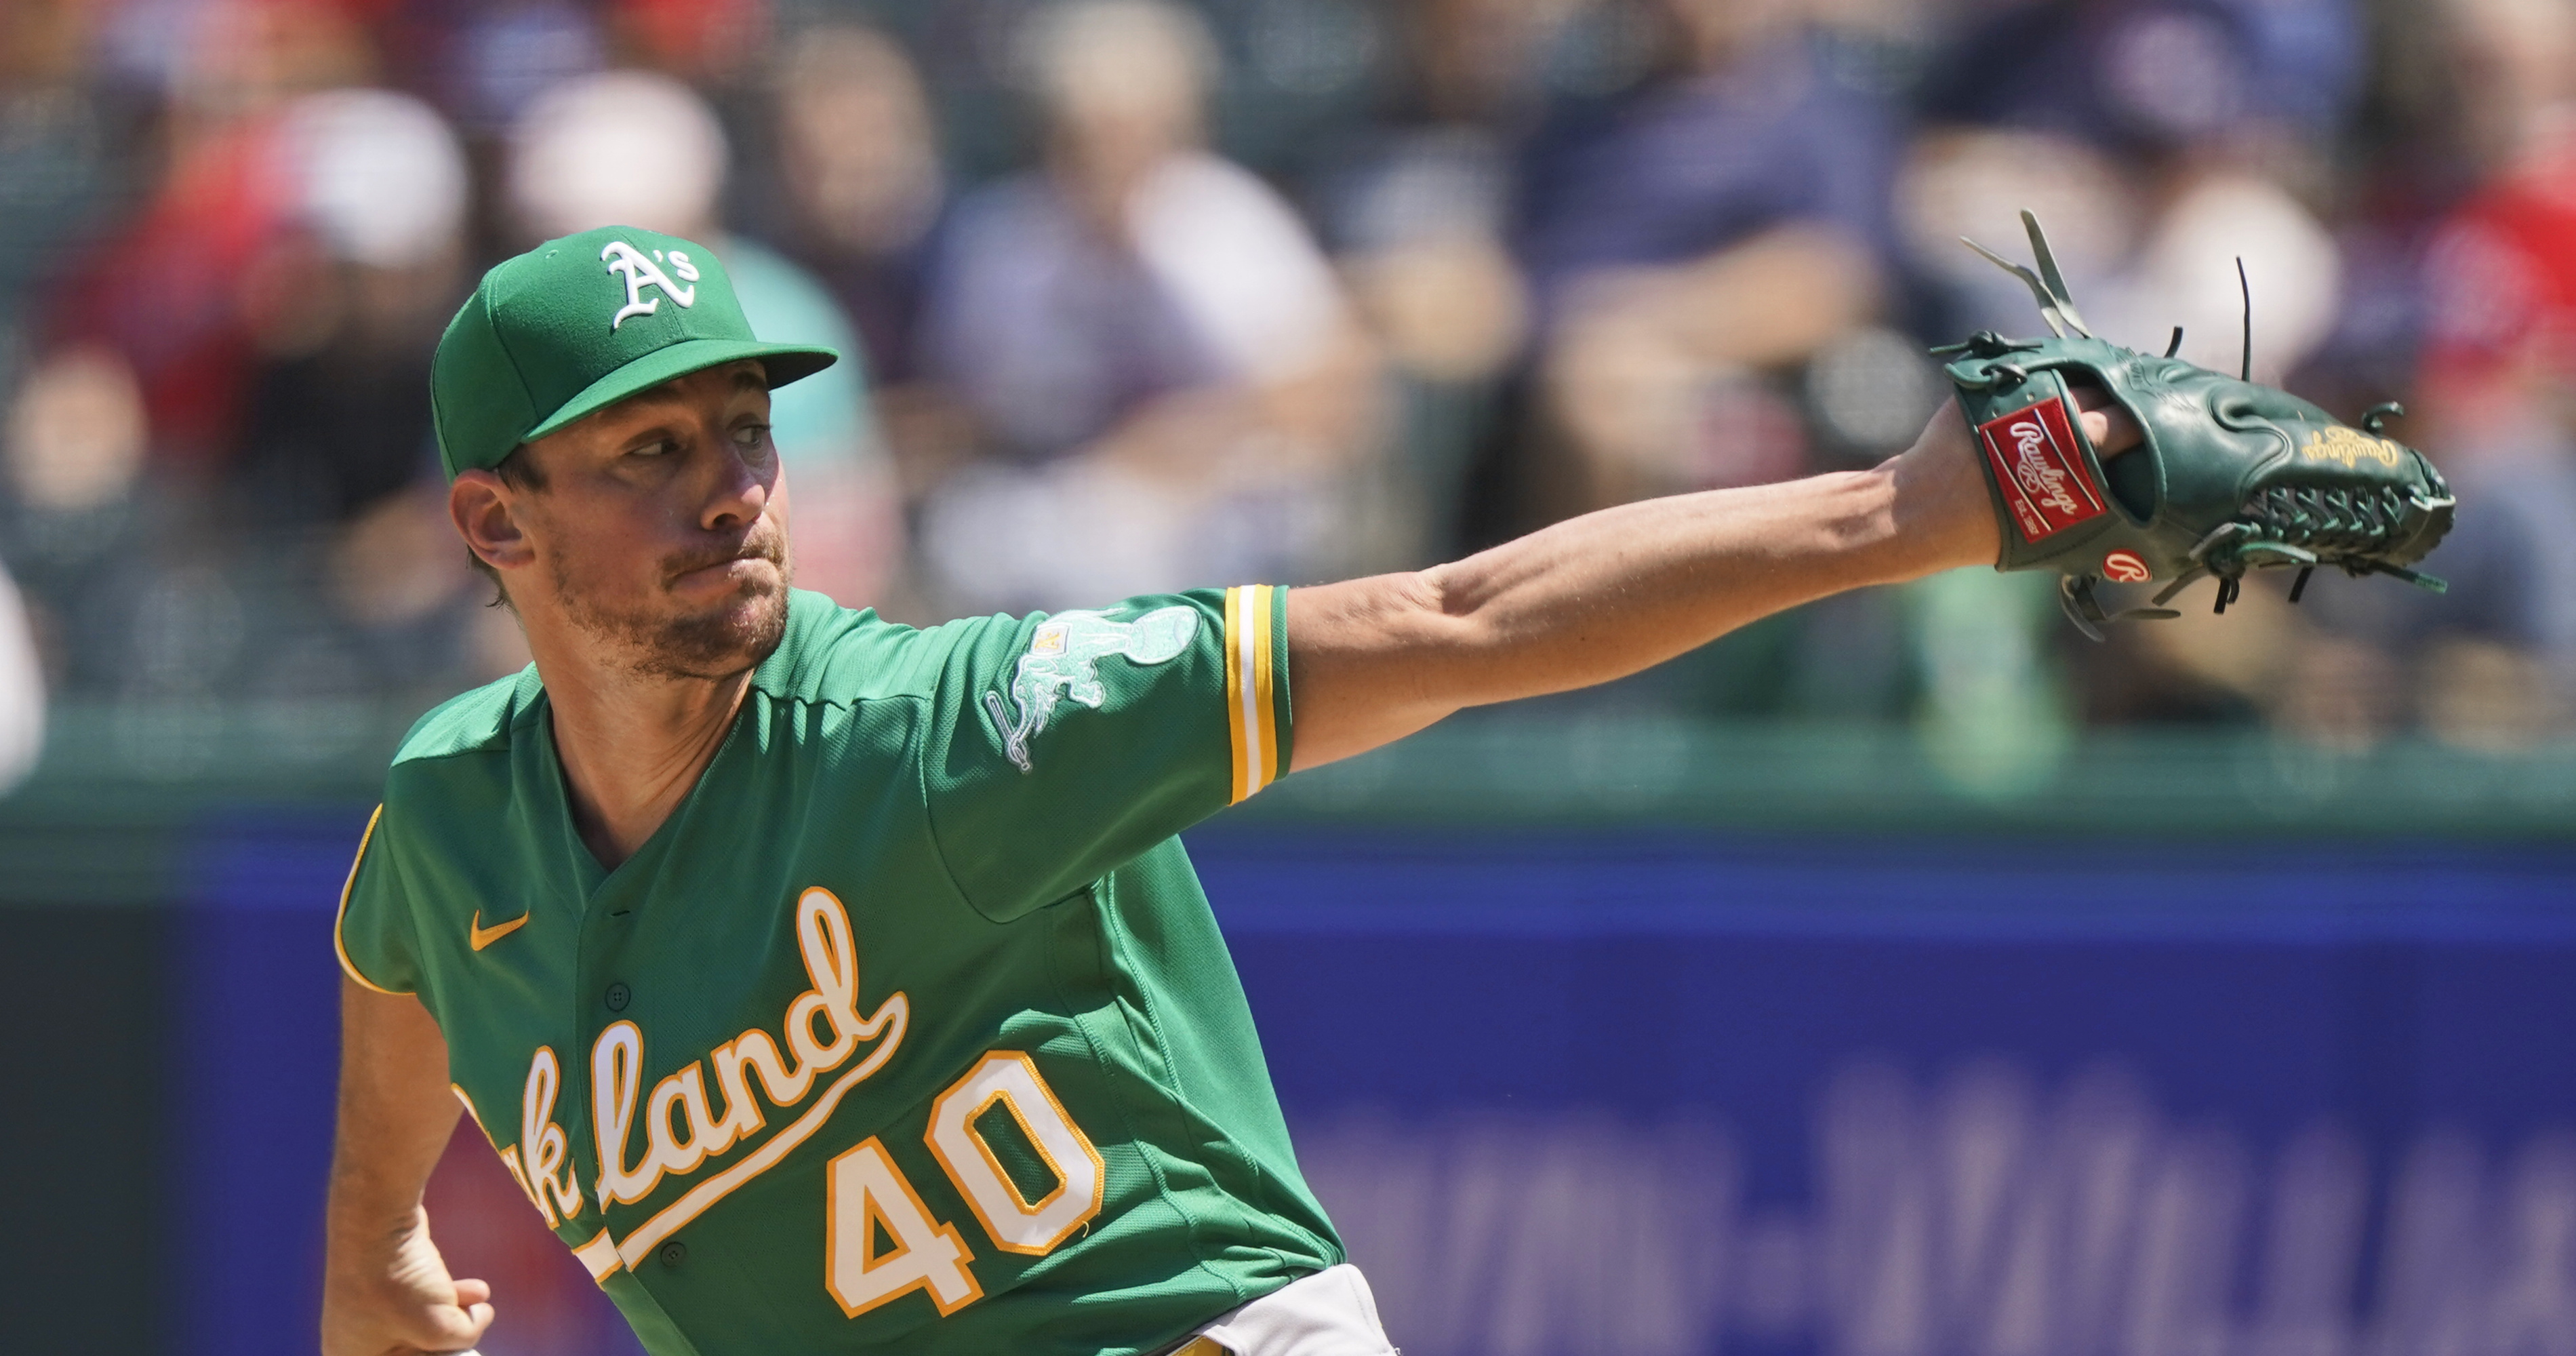 Chris Bassitt conscious after line drive hit Oakland A's pitcher in his face,  manager says